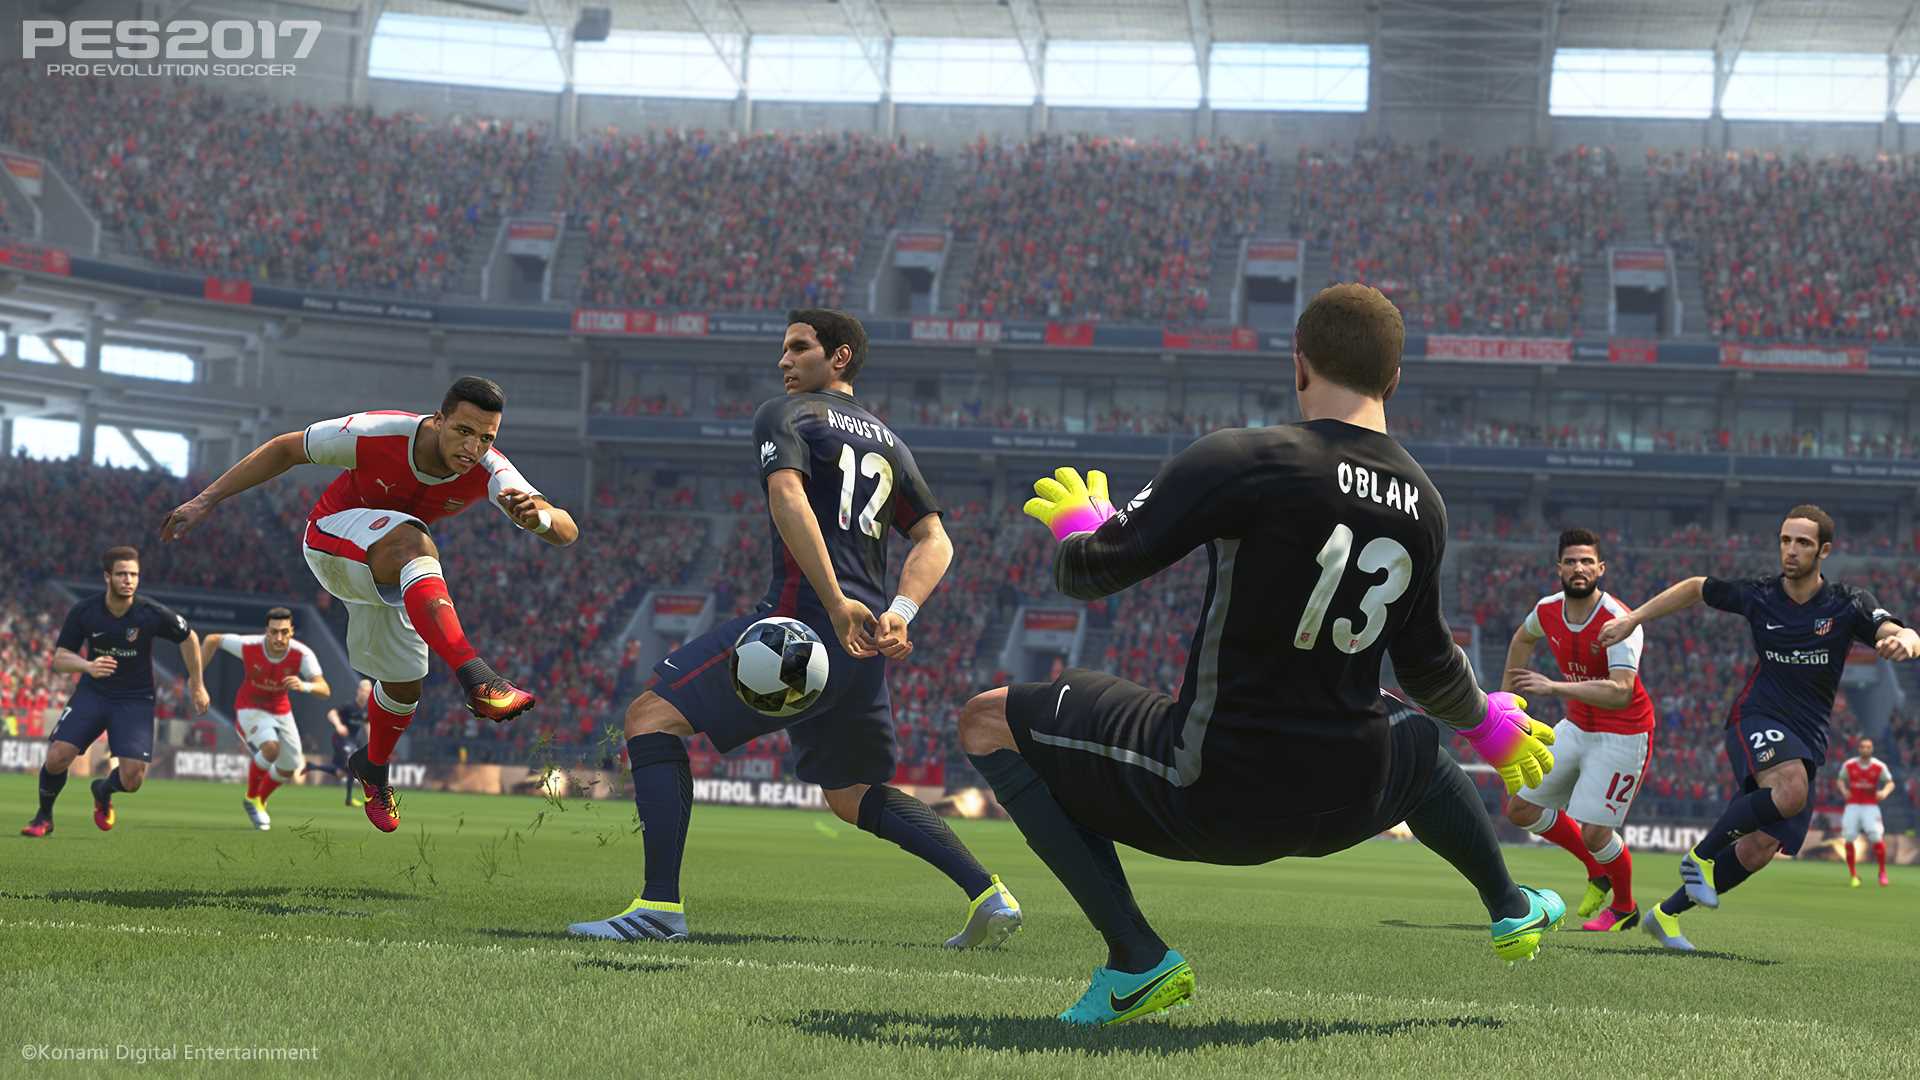 Preview Pes 2017 Could Be The Greatest Football Game Ever